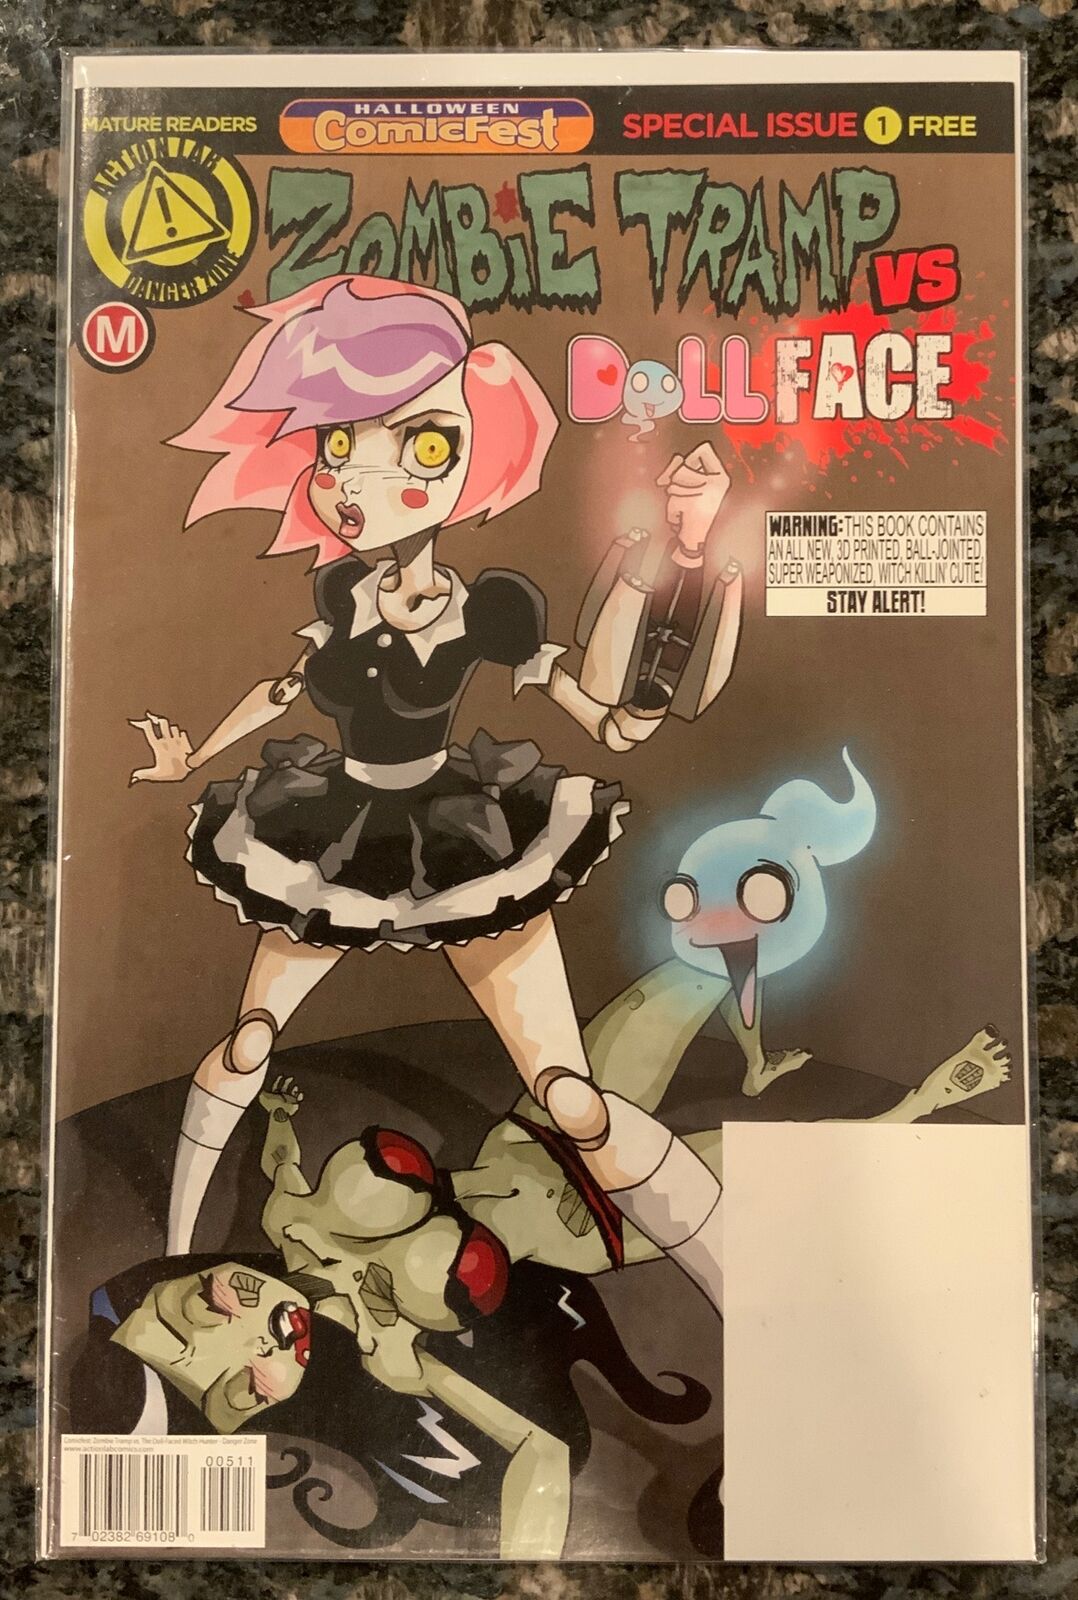 Zombie Tramp VS Dollface  #1 Action Labs 2016 Halloween Comicfest Special Issue